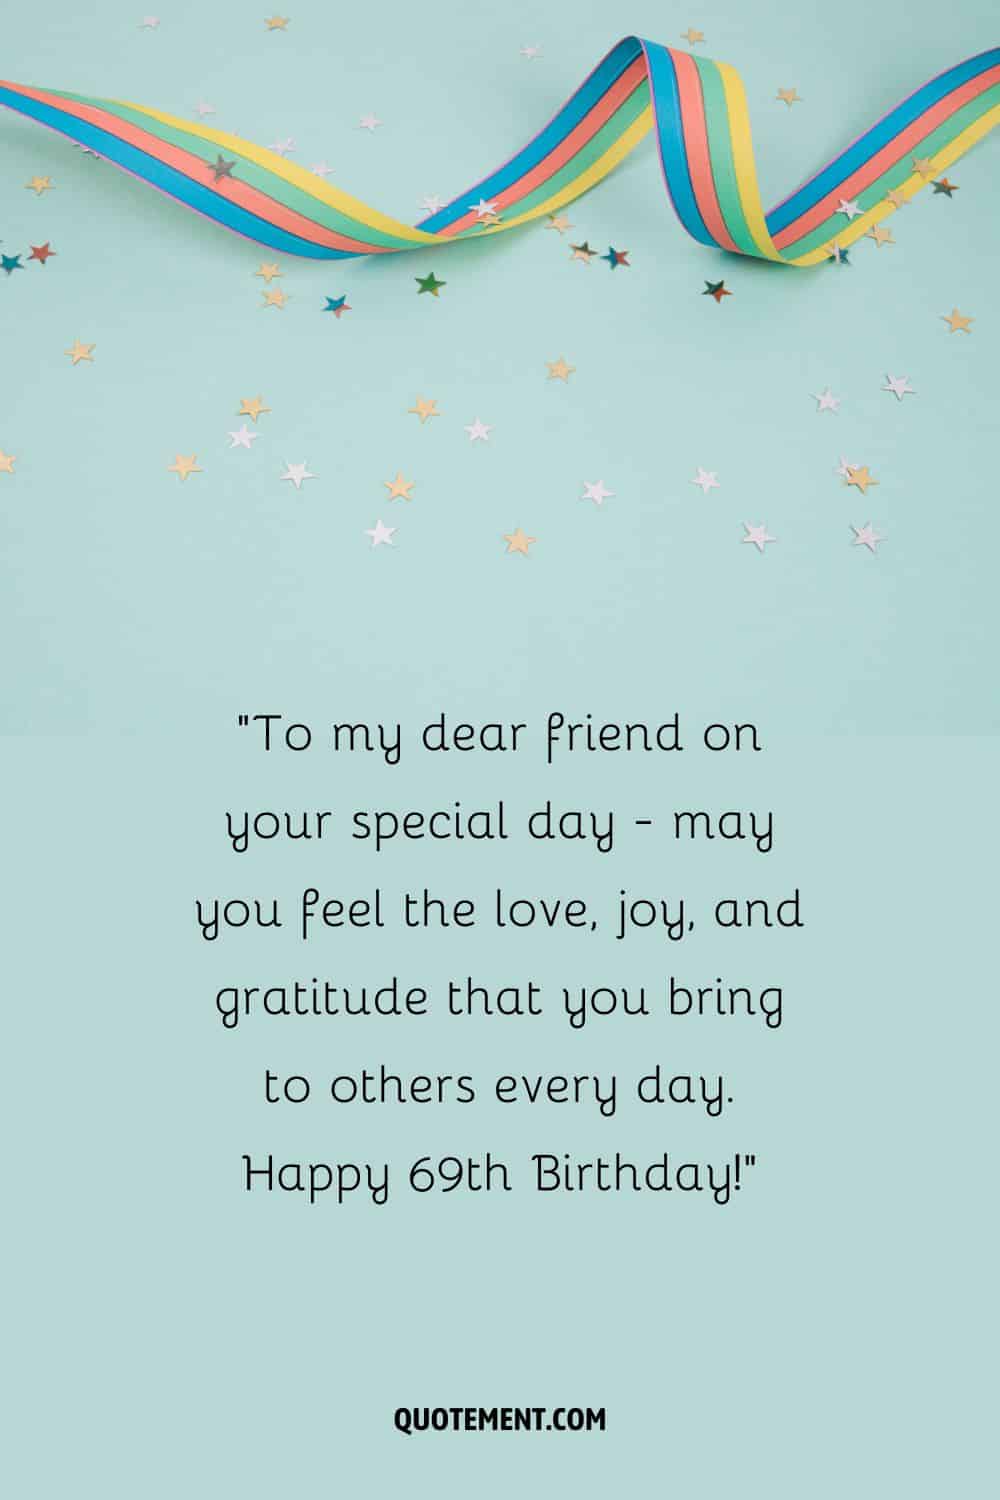 To my dear friend on your special day - may you feel the love, joy, and gratitude that you bring to others every day. Happy 69th Birthday!